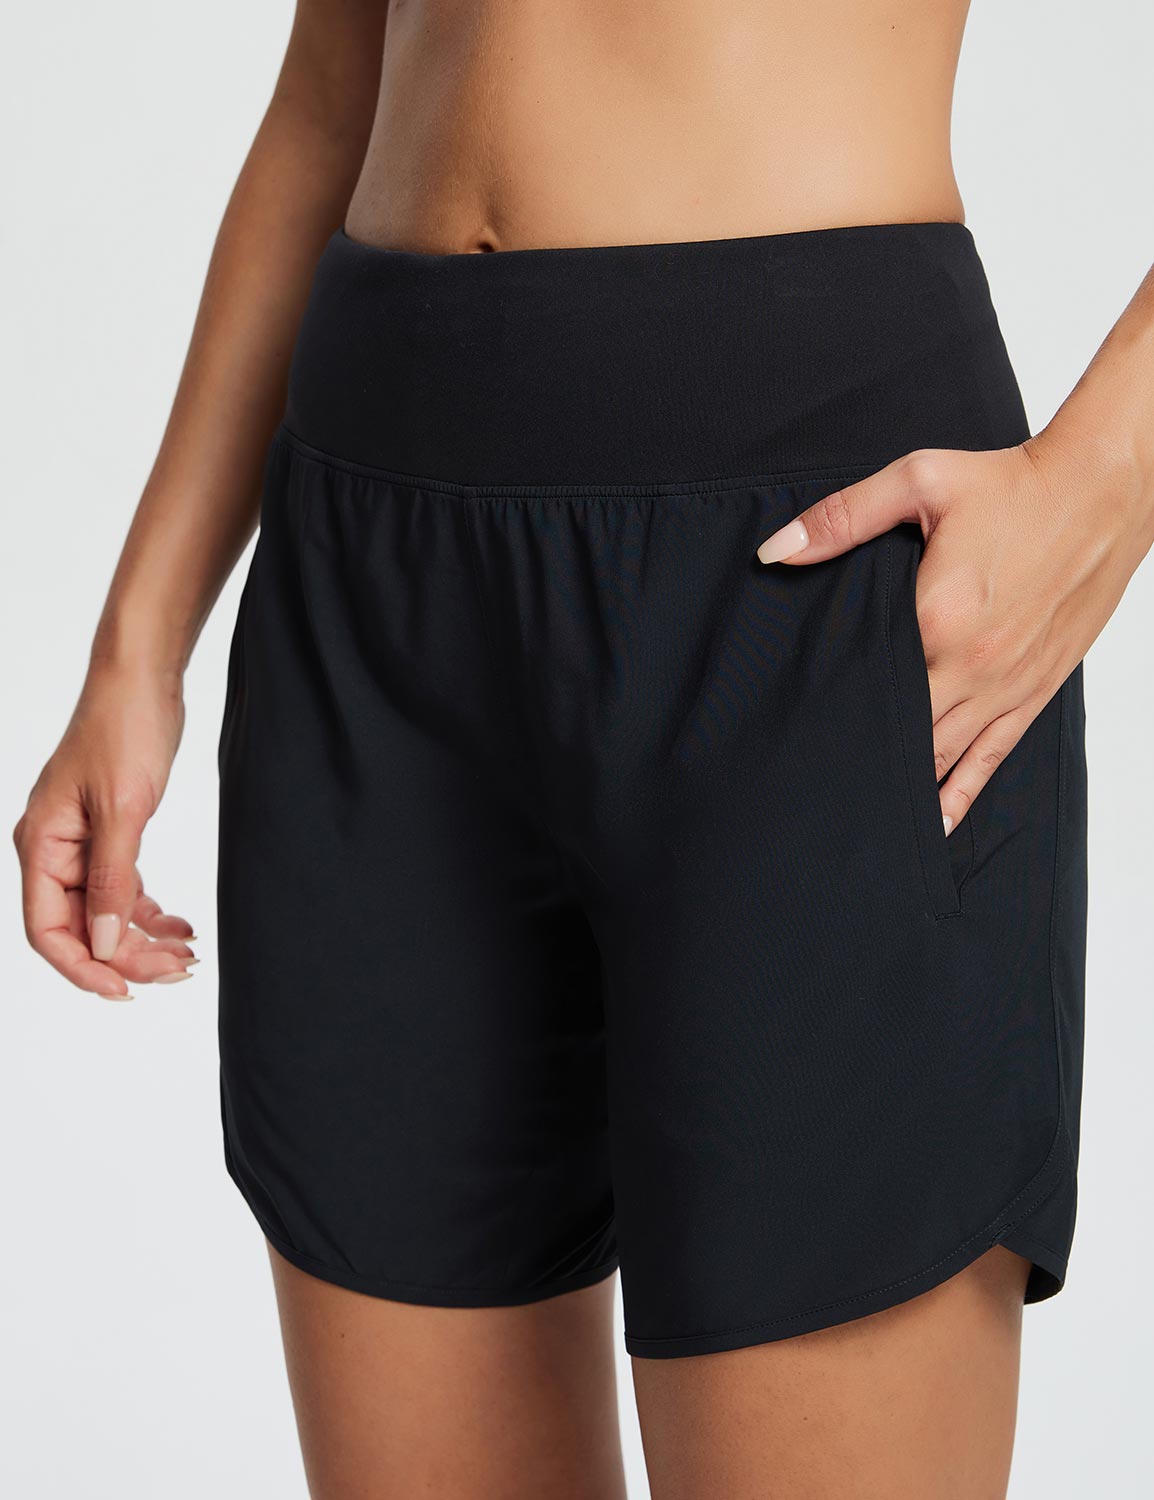 Baleaf Women's Sustainable Knitted 2-in-1 Shorts dbd048 Anthracite Details